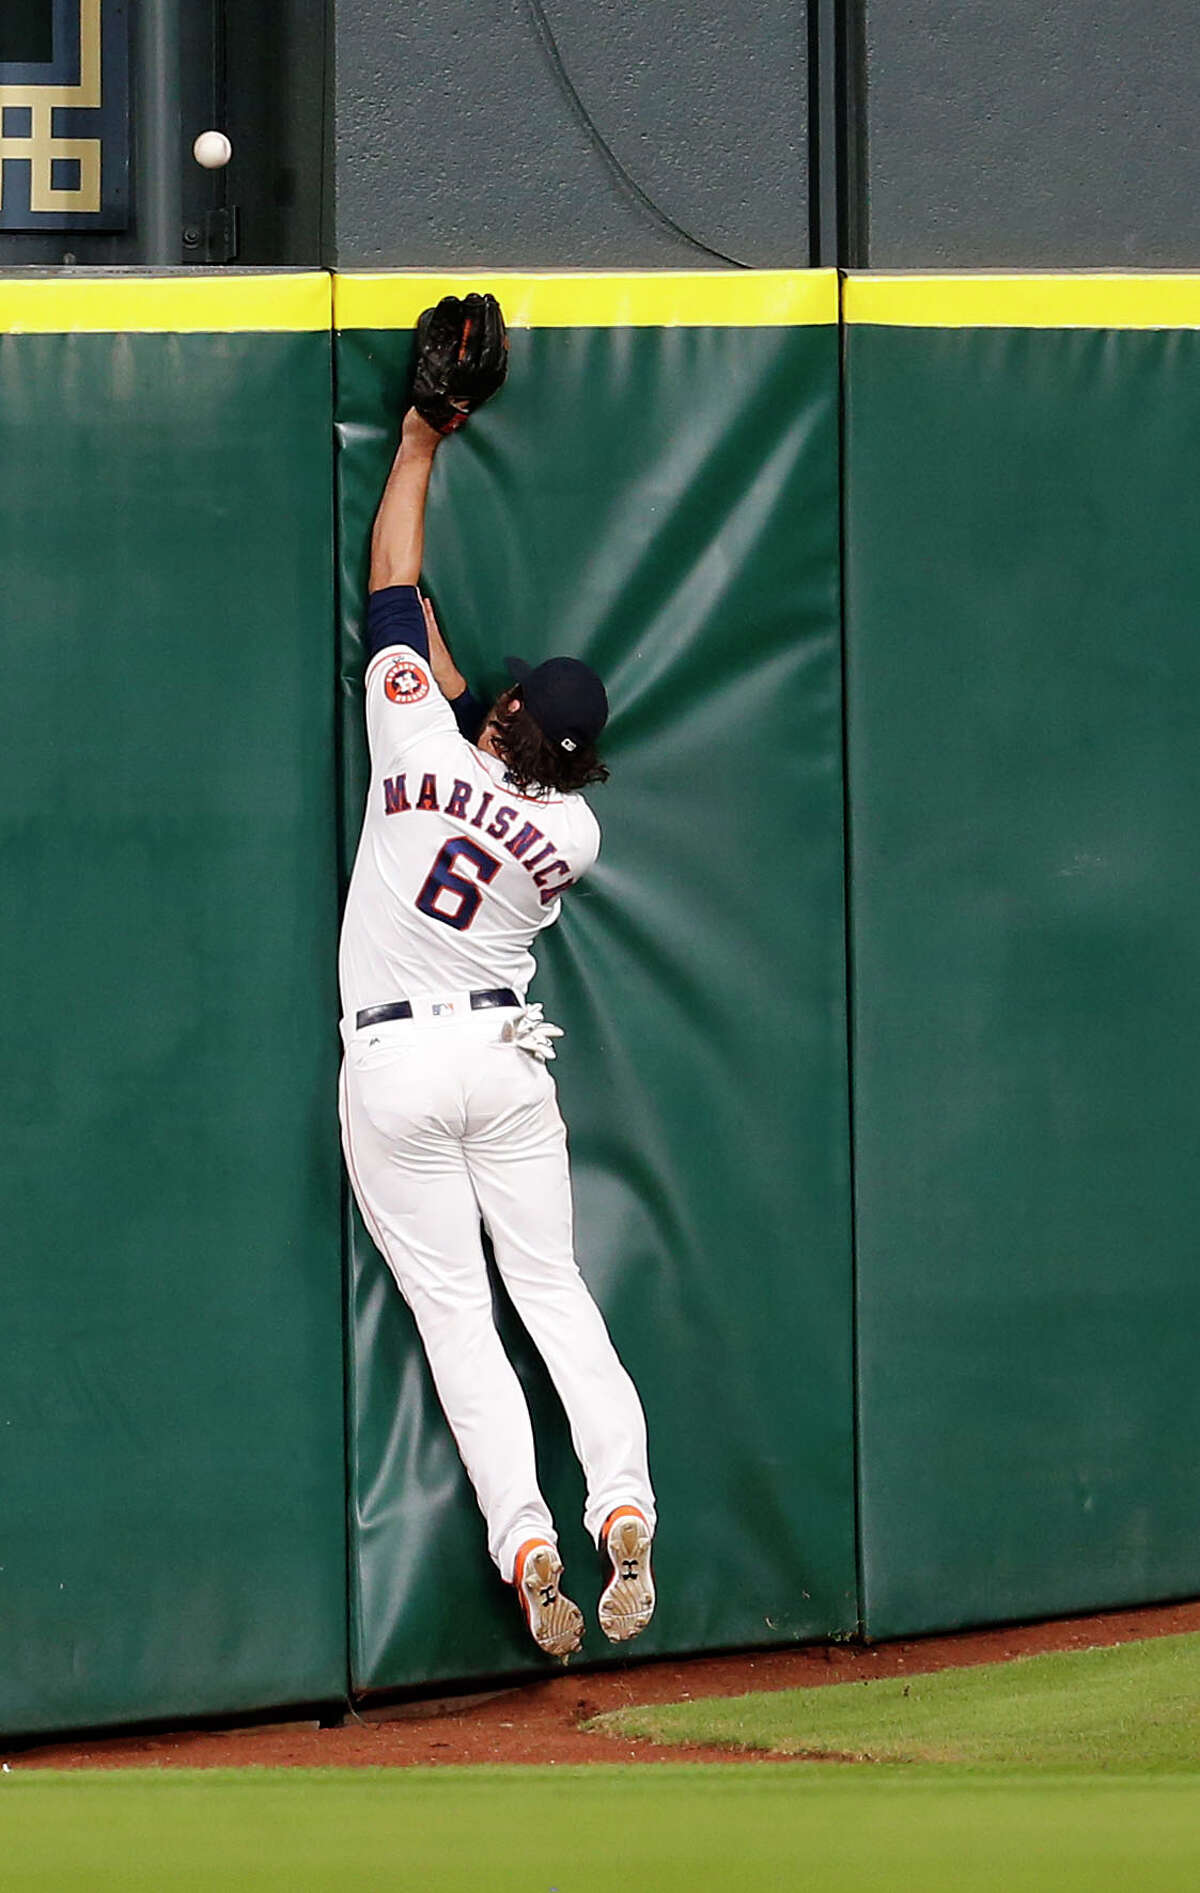 Center fielder Jake Marisnick makes a valiant effort to prevent the only run allowed by Lance McCullers but can't catch a homer by the Yankees' Brian McCann.